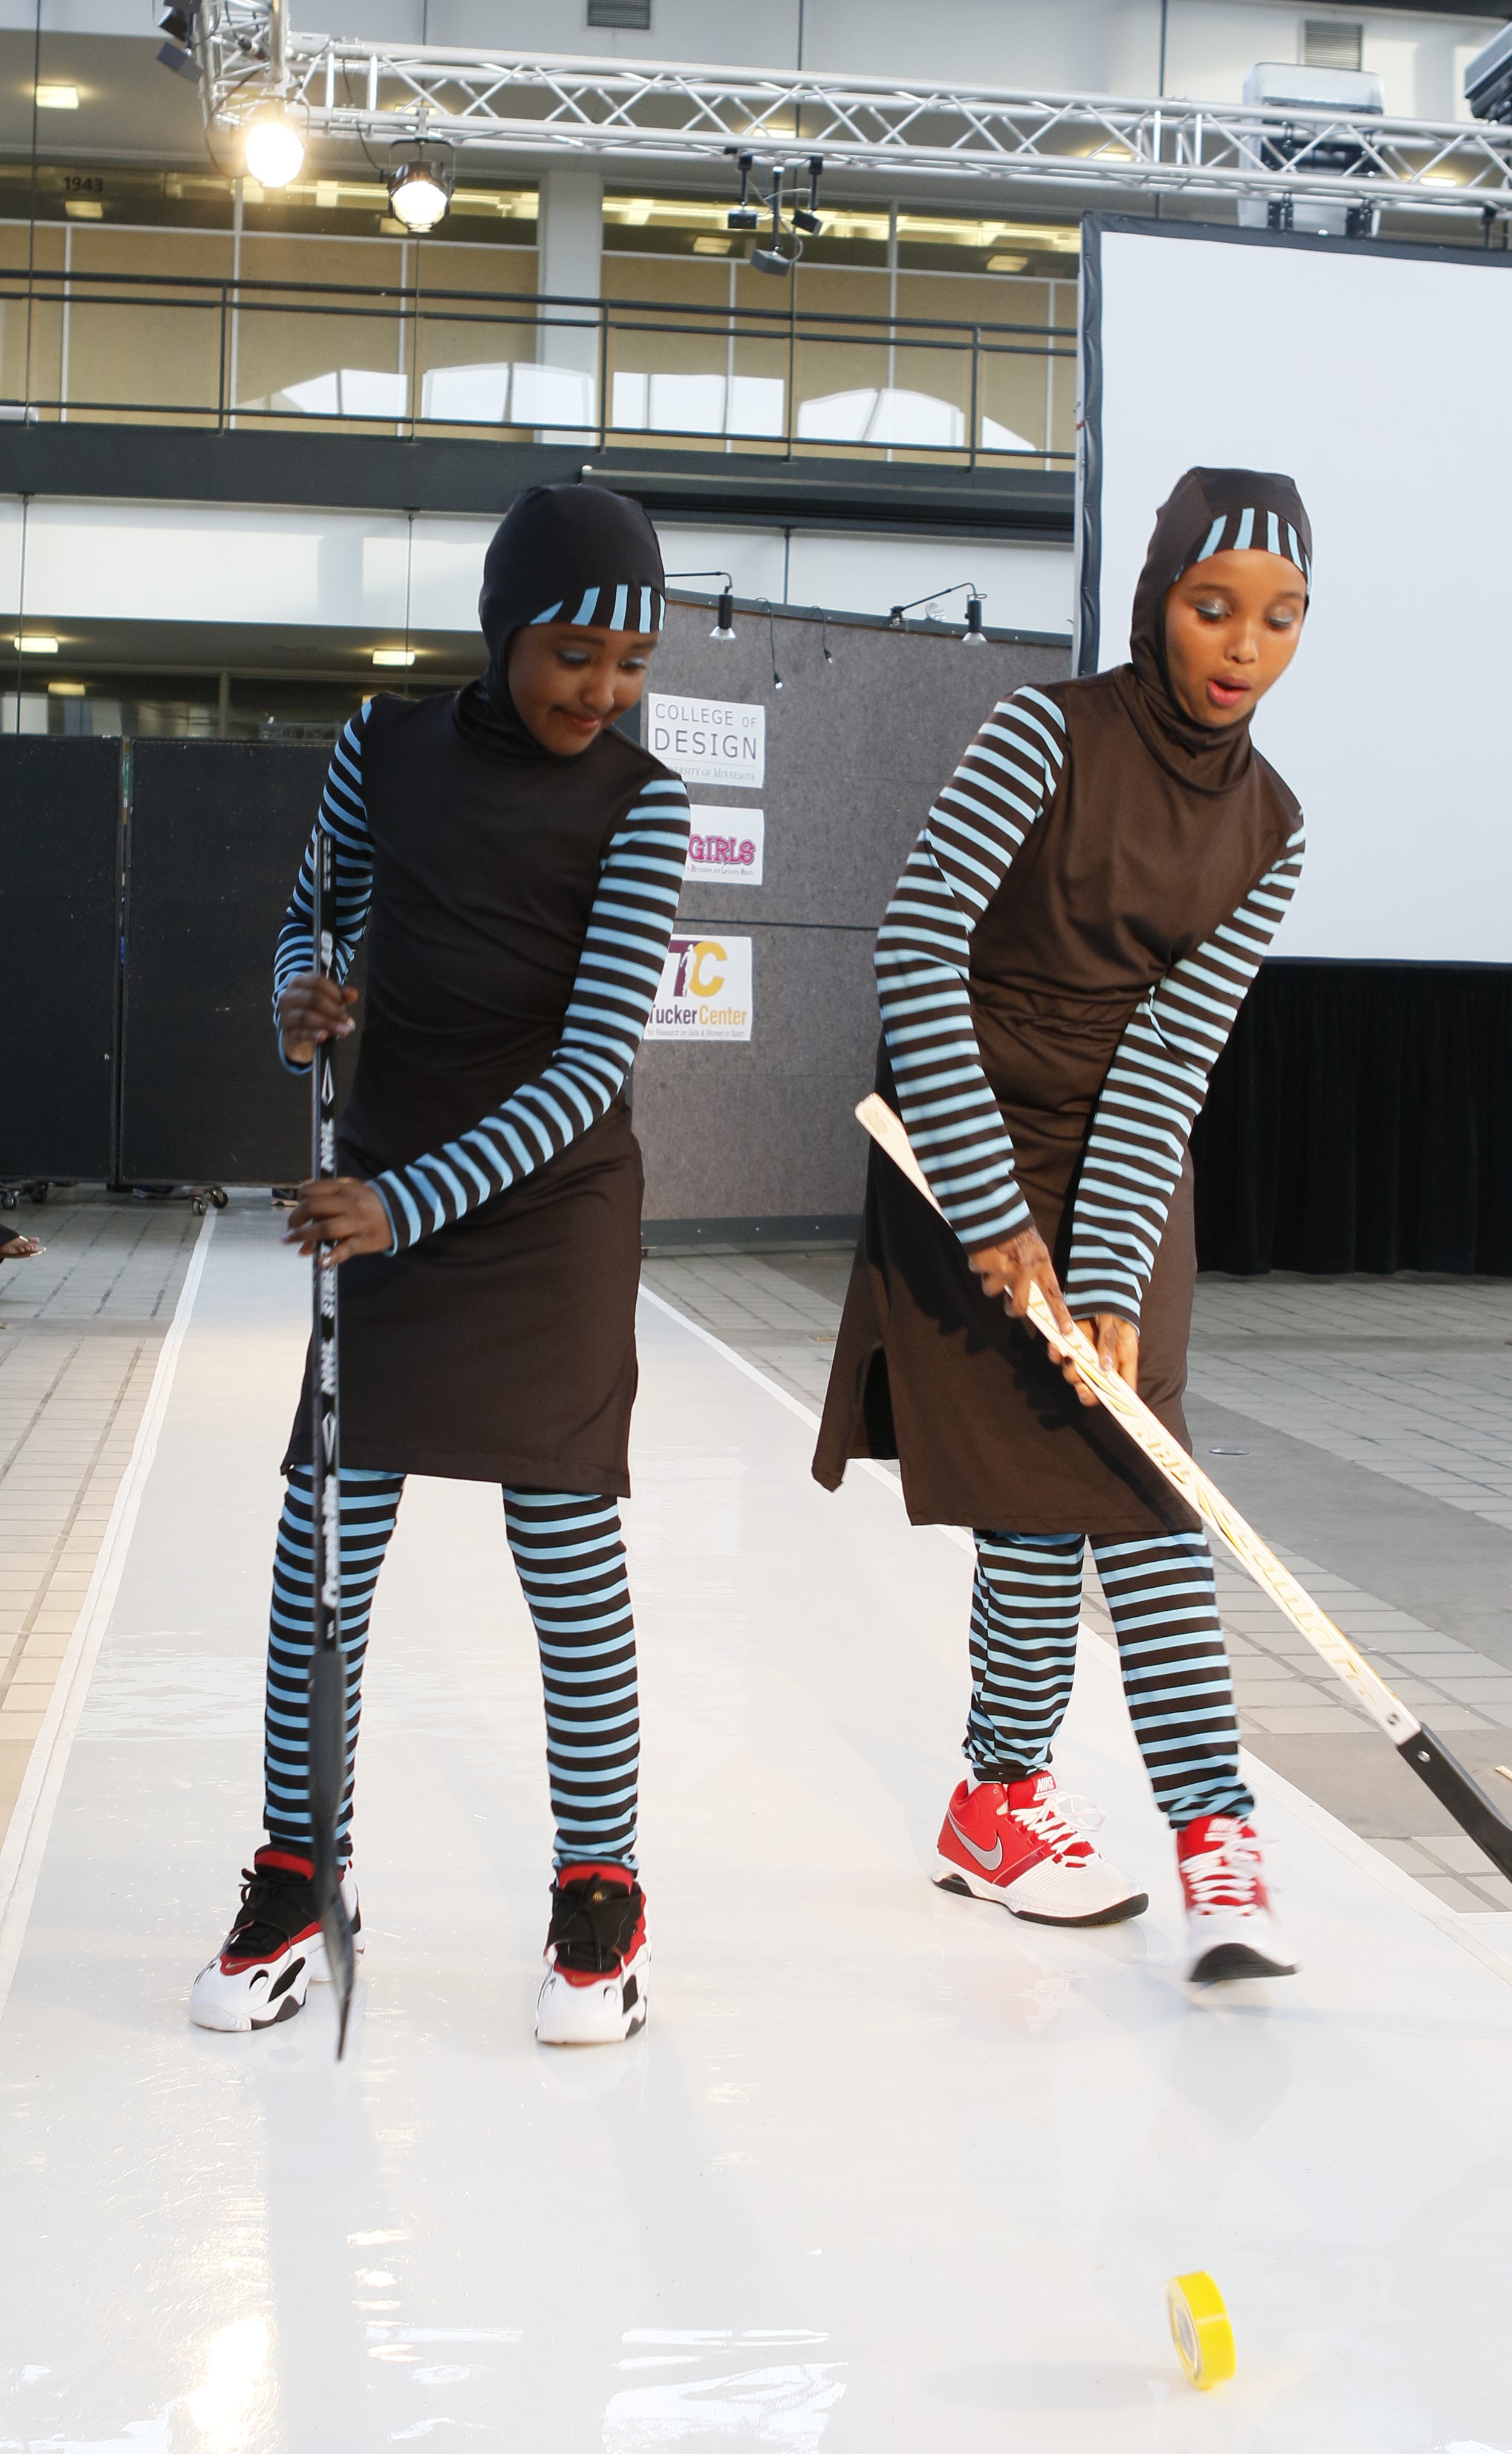  "Let's Play Hockey!" on the Fashion Show Runway 